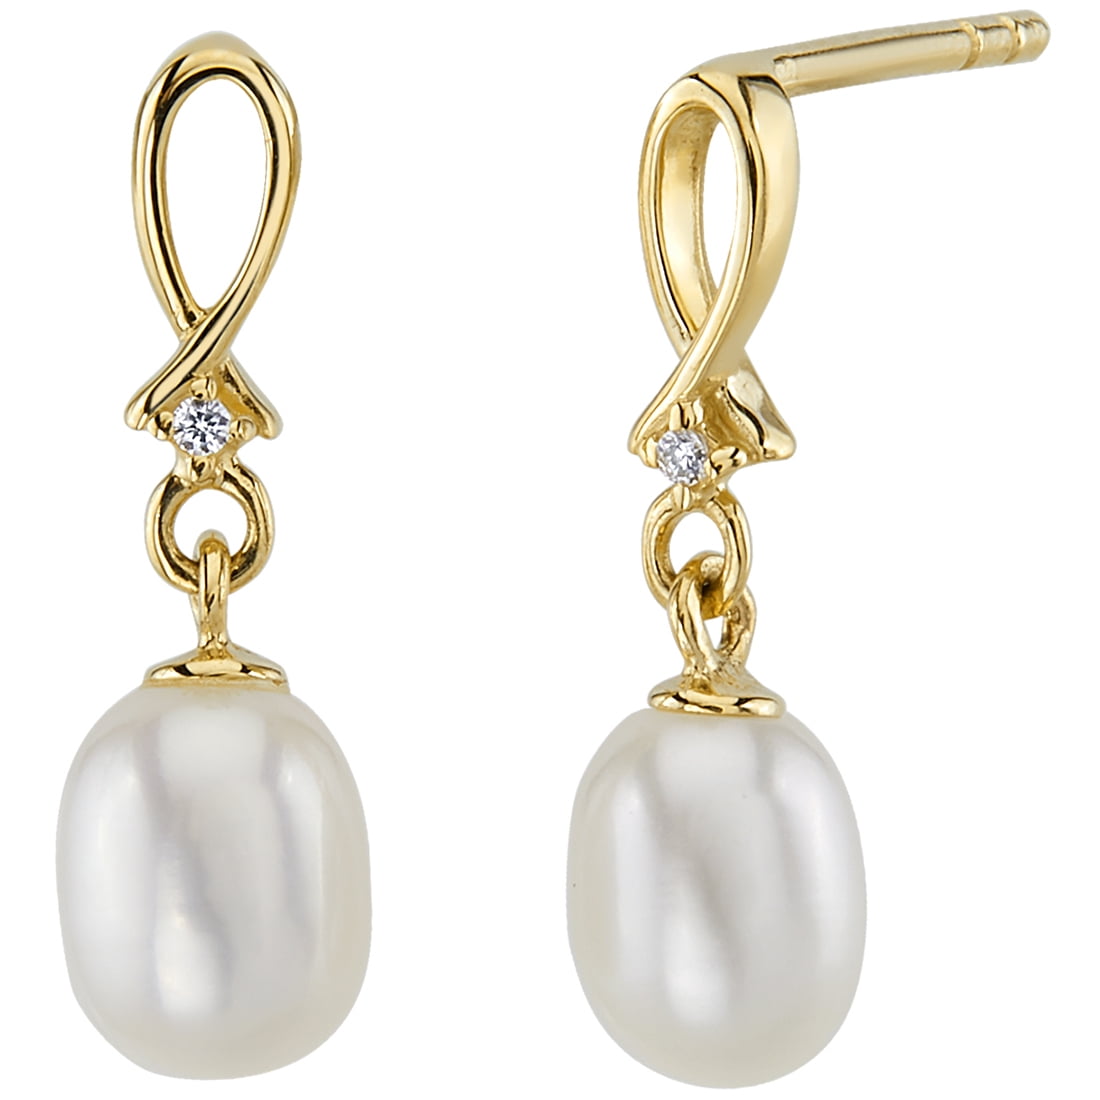 Freshwater Cultured 8-8.5mm Pearl 14kt Yellow Gold Earrings | Costco